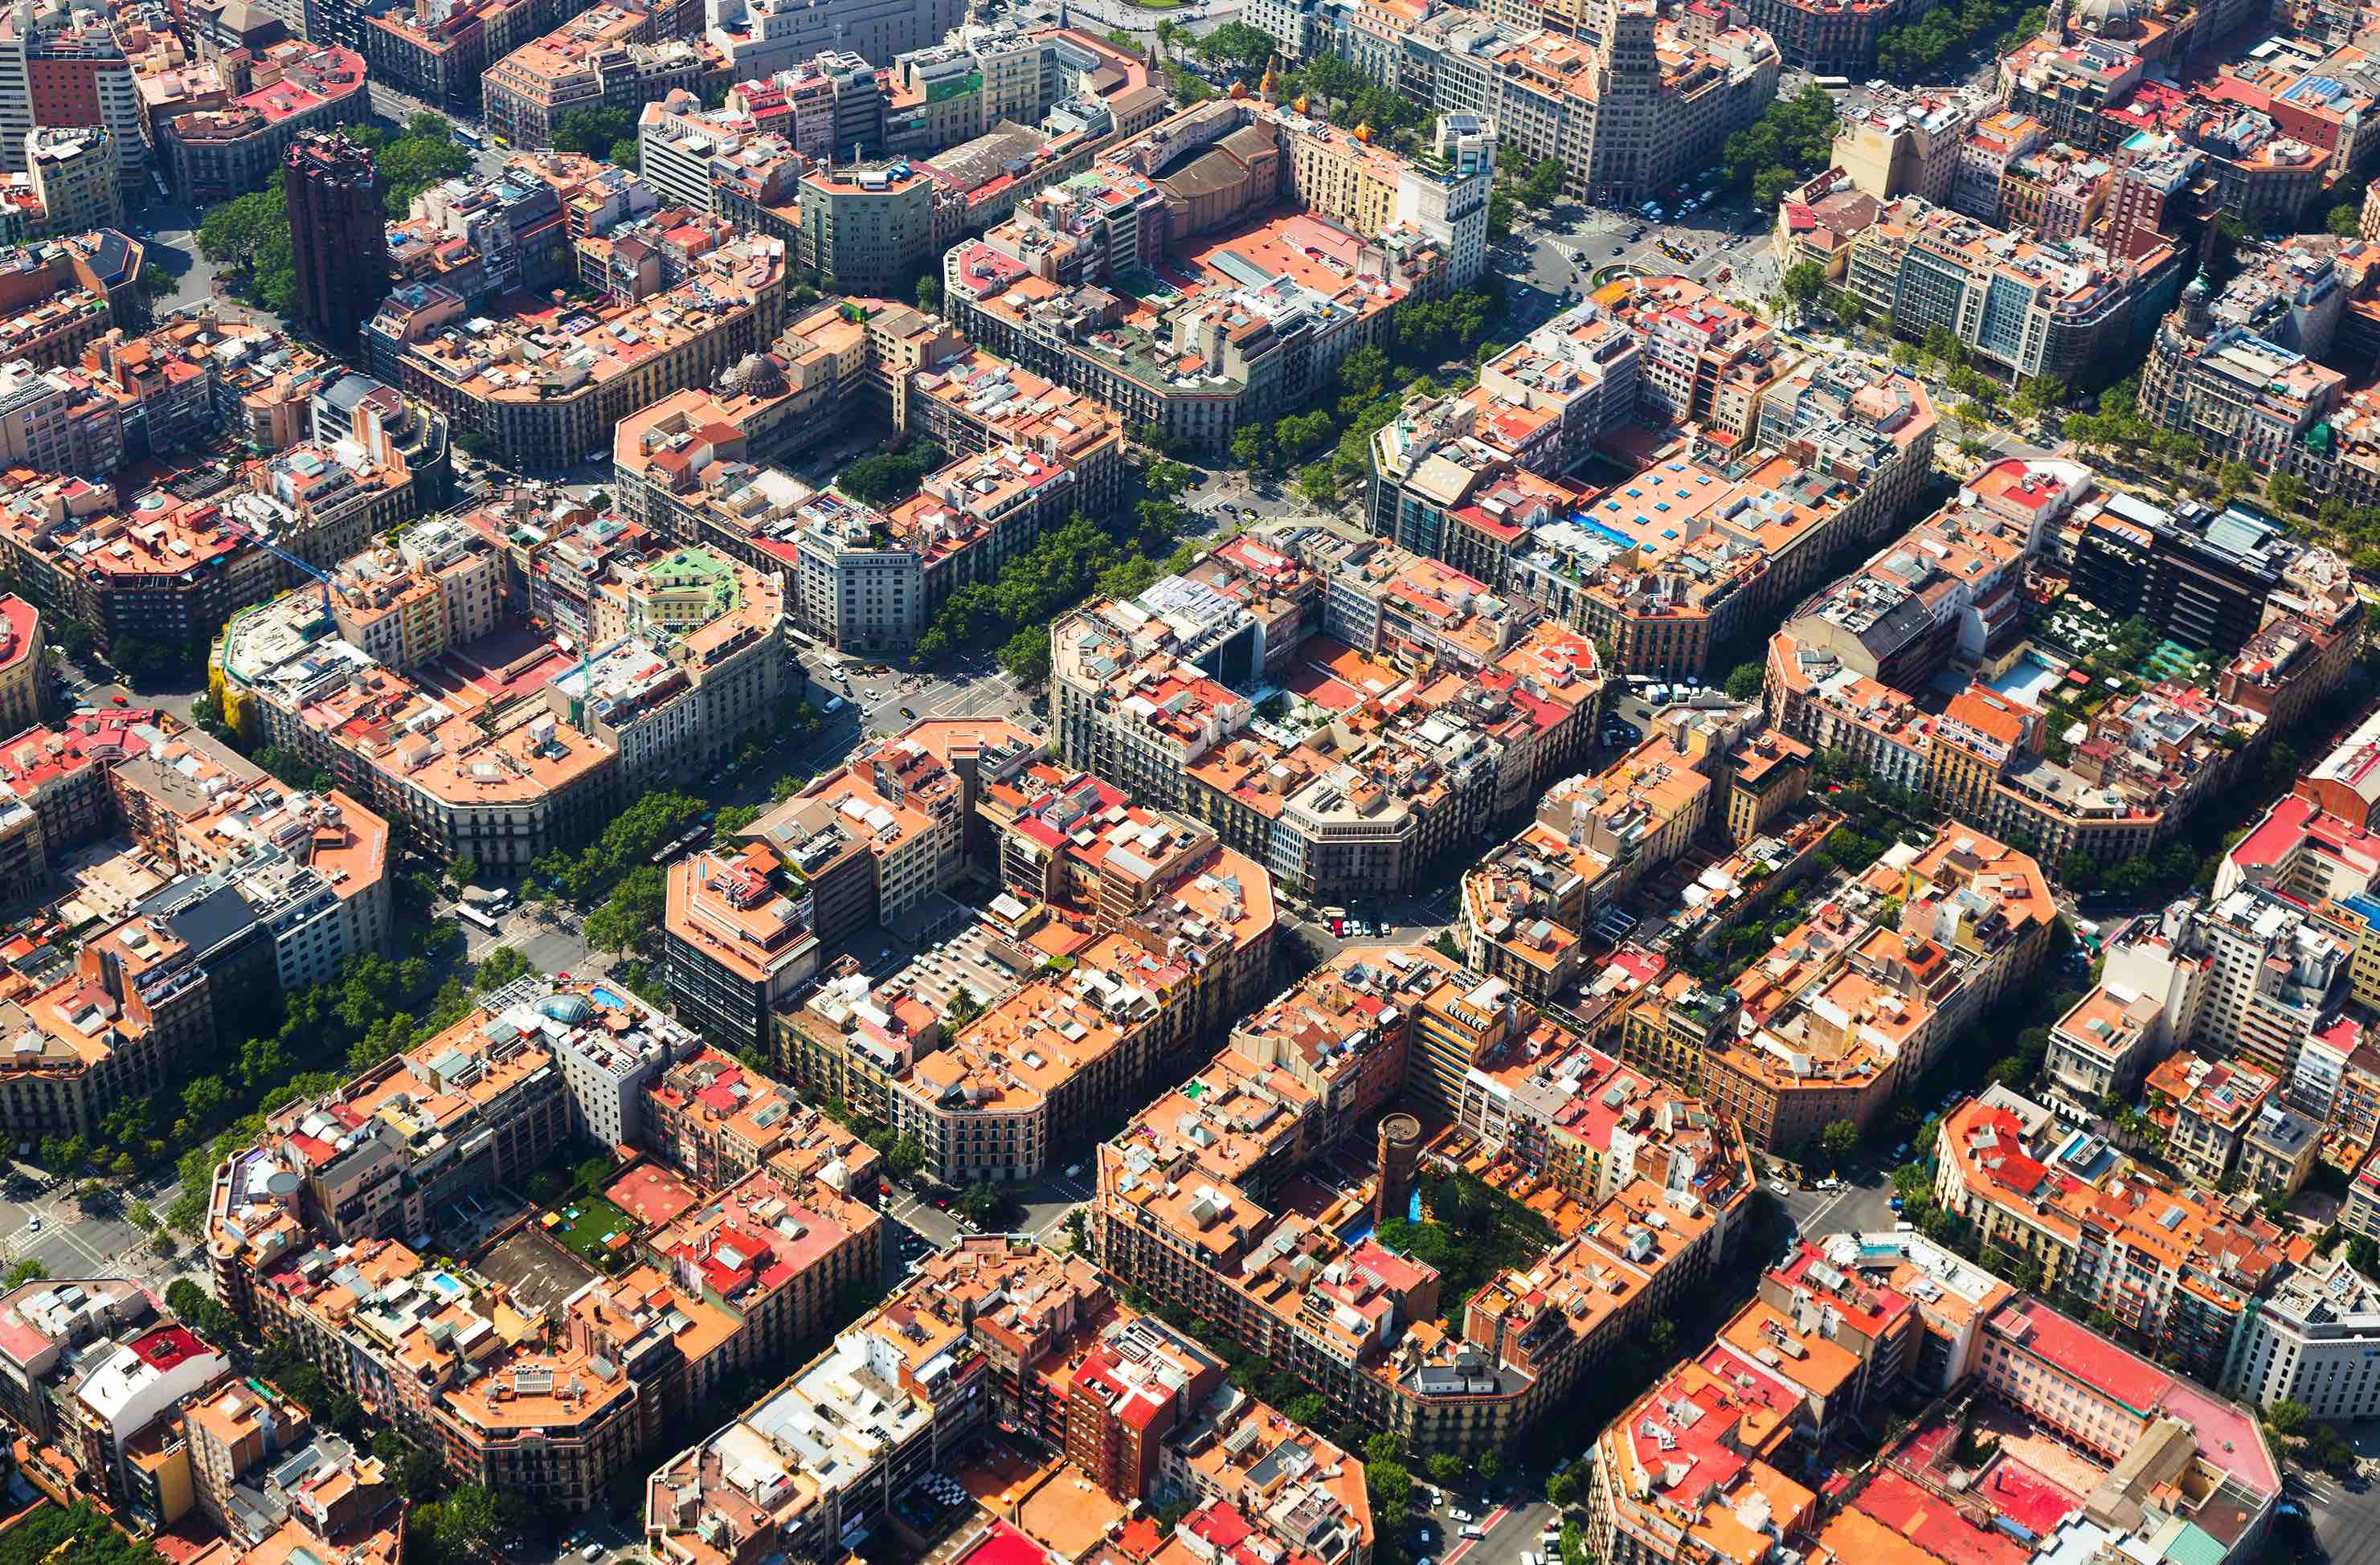 The Barcelona-based company builds homes on the roofs of existing houses